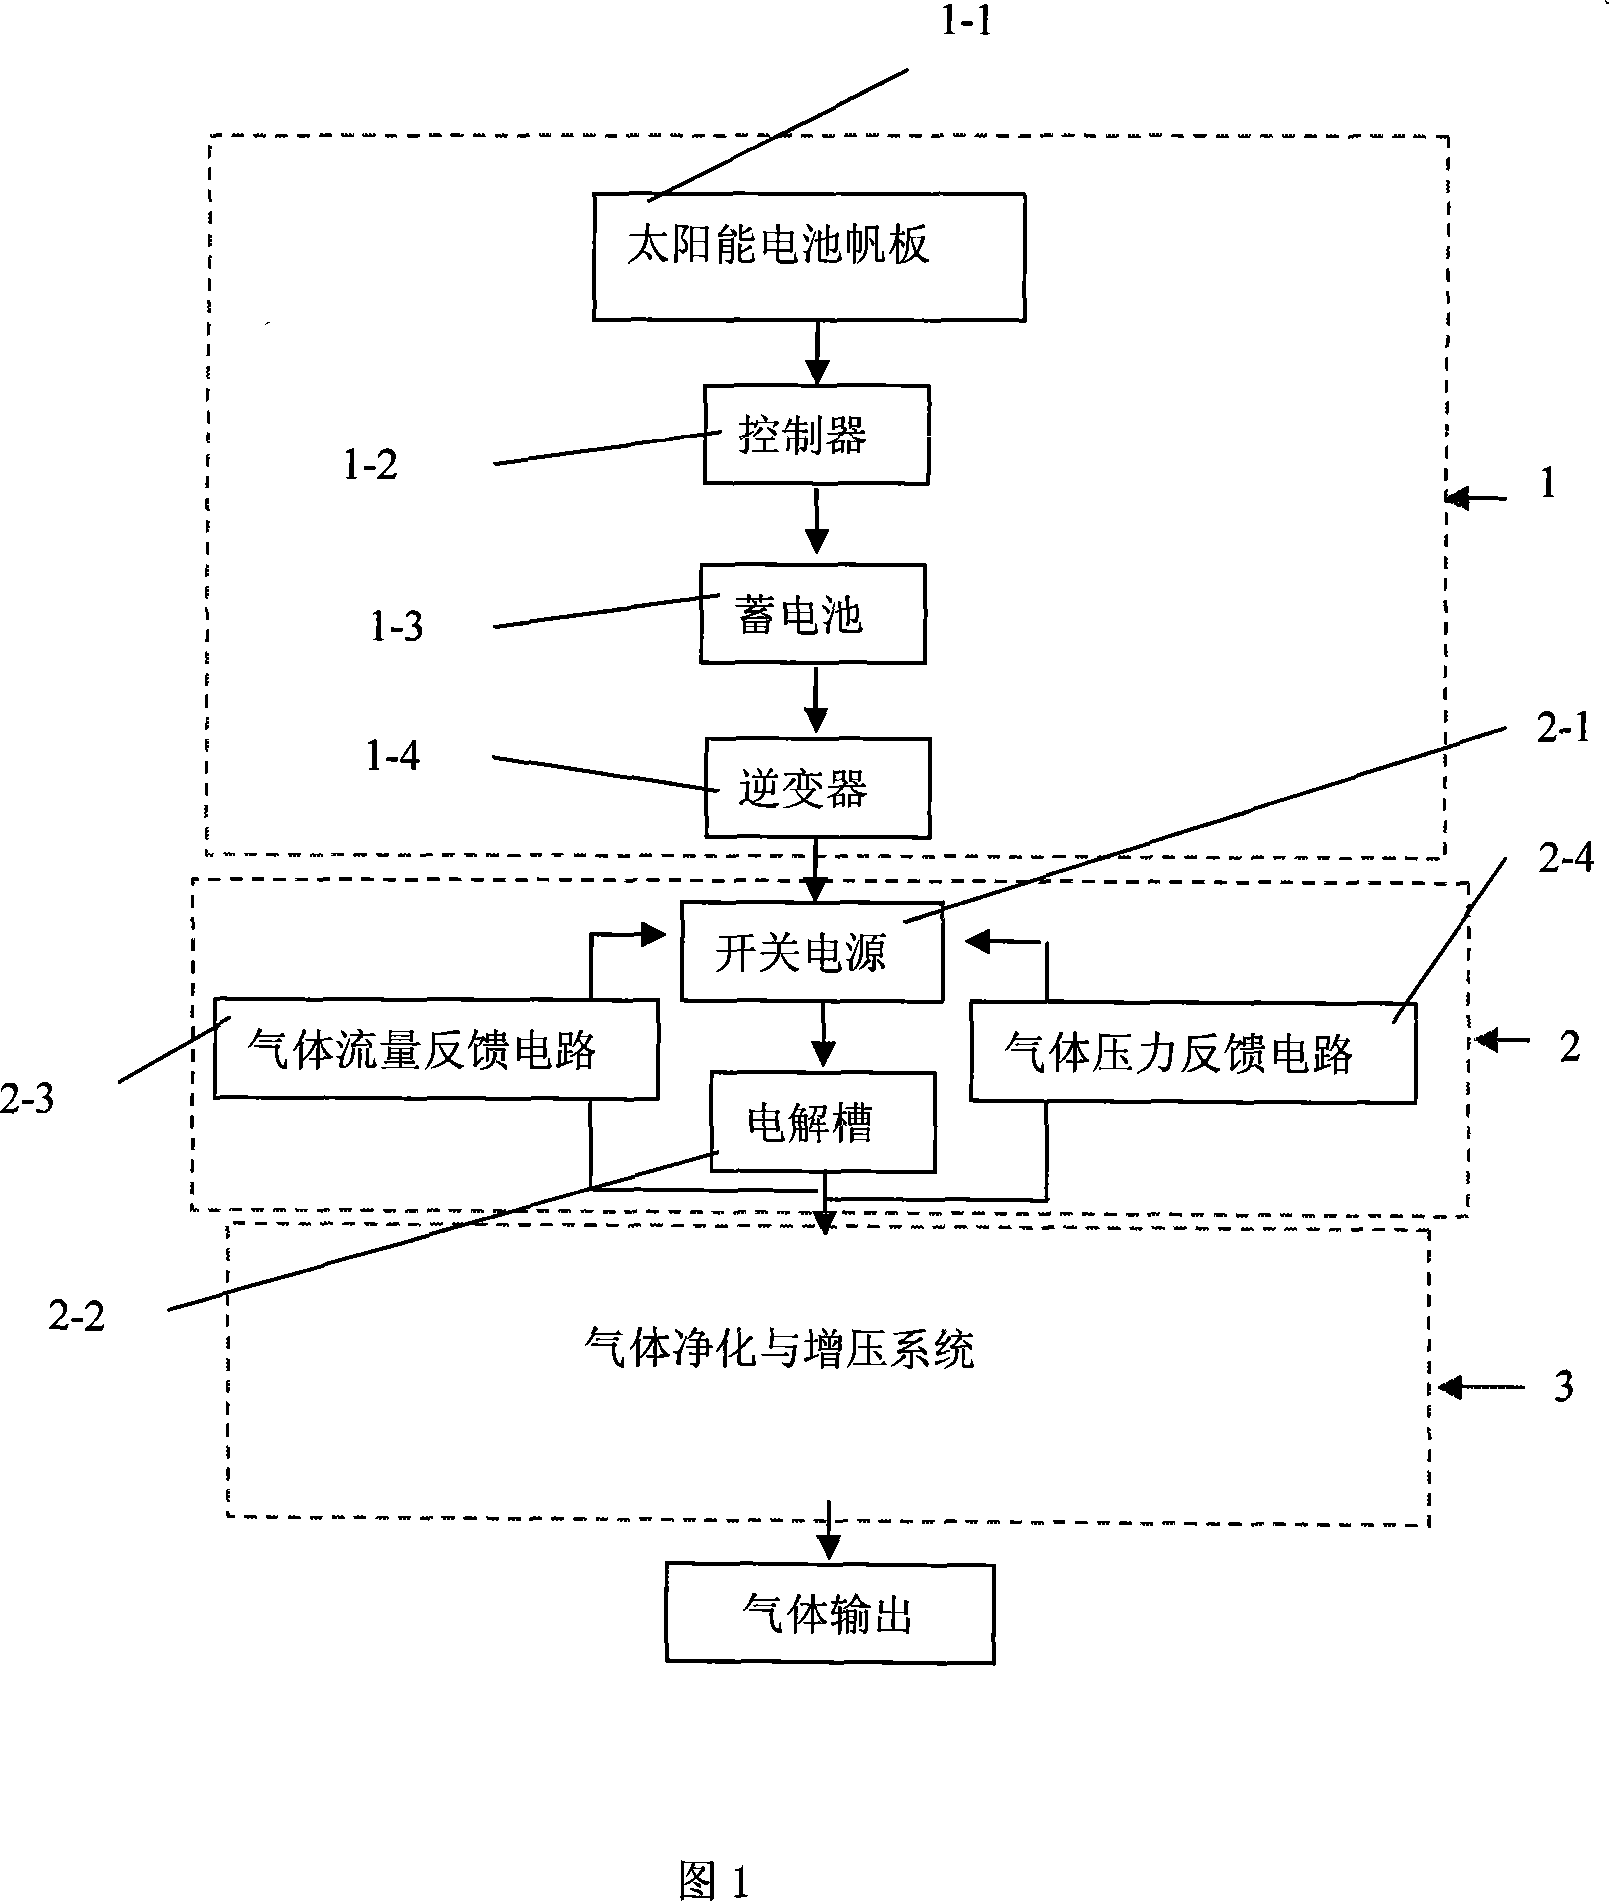 Method for producing solar water-based high pressure high purity oxyhydrogen fuel for space vehicle